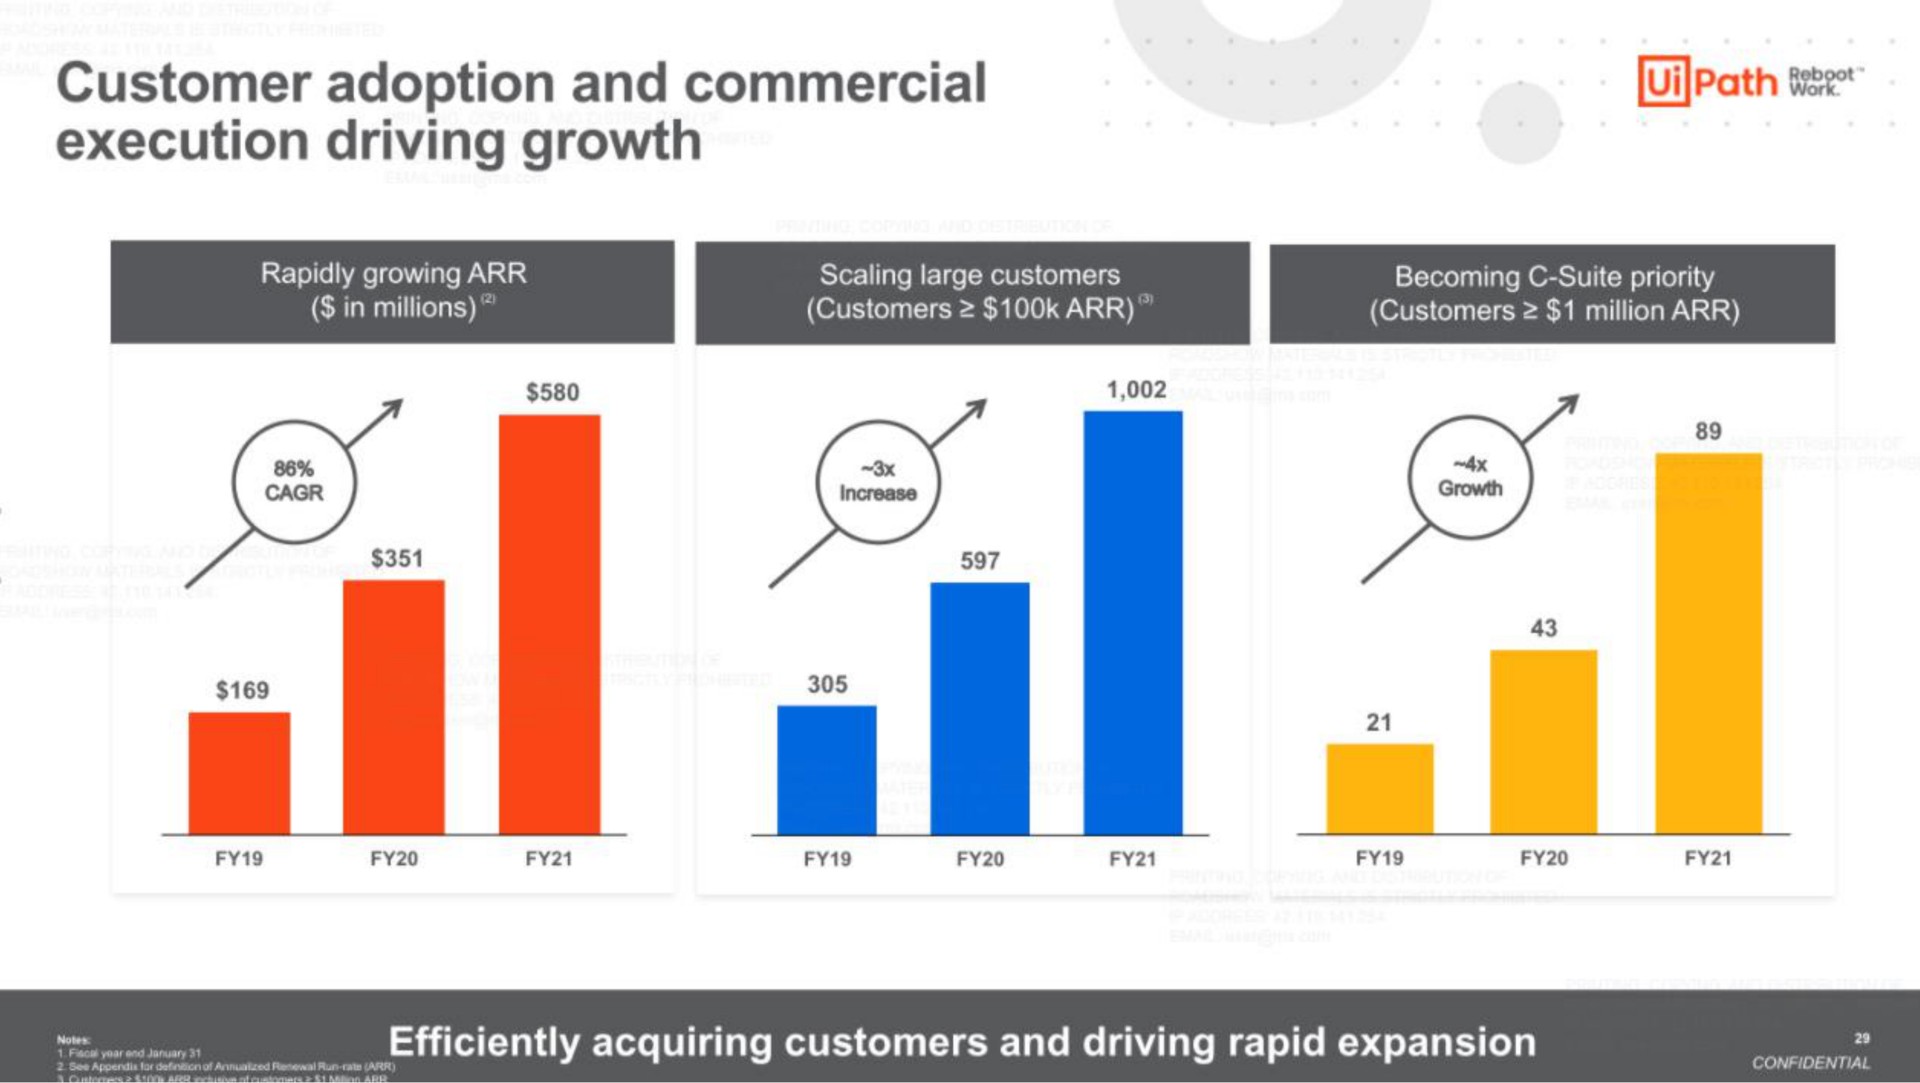 customer adoption and commercial execution driving growth path wee | UiPath